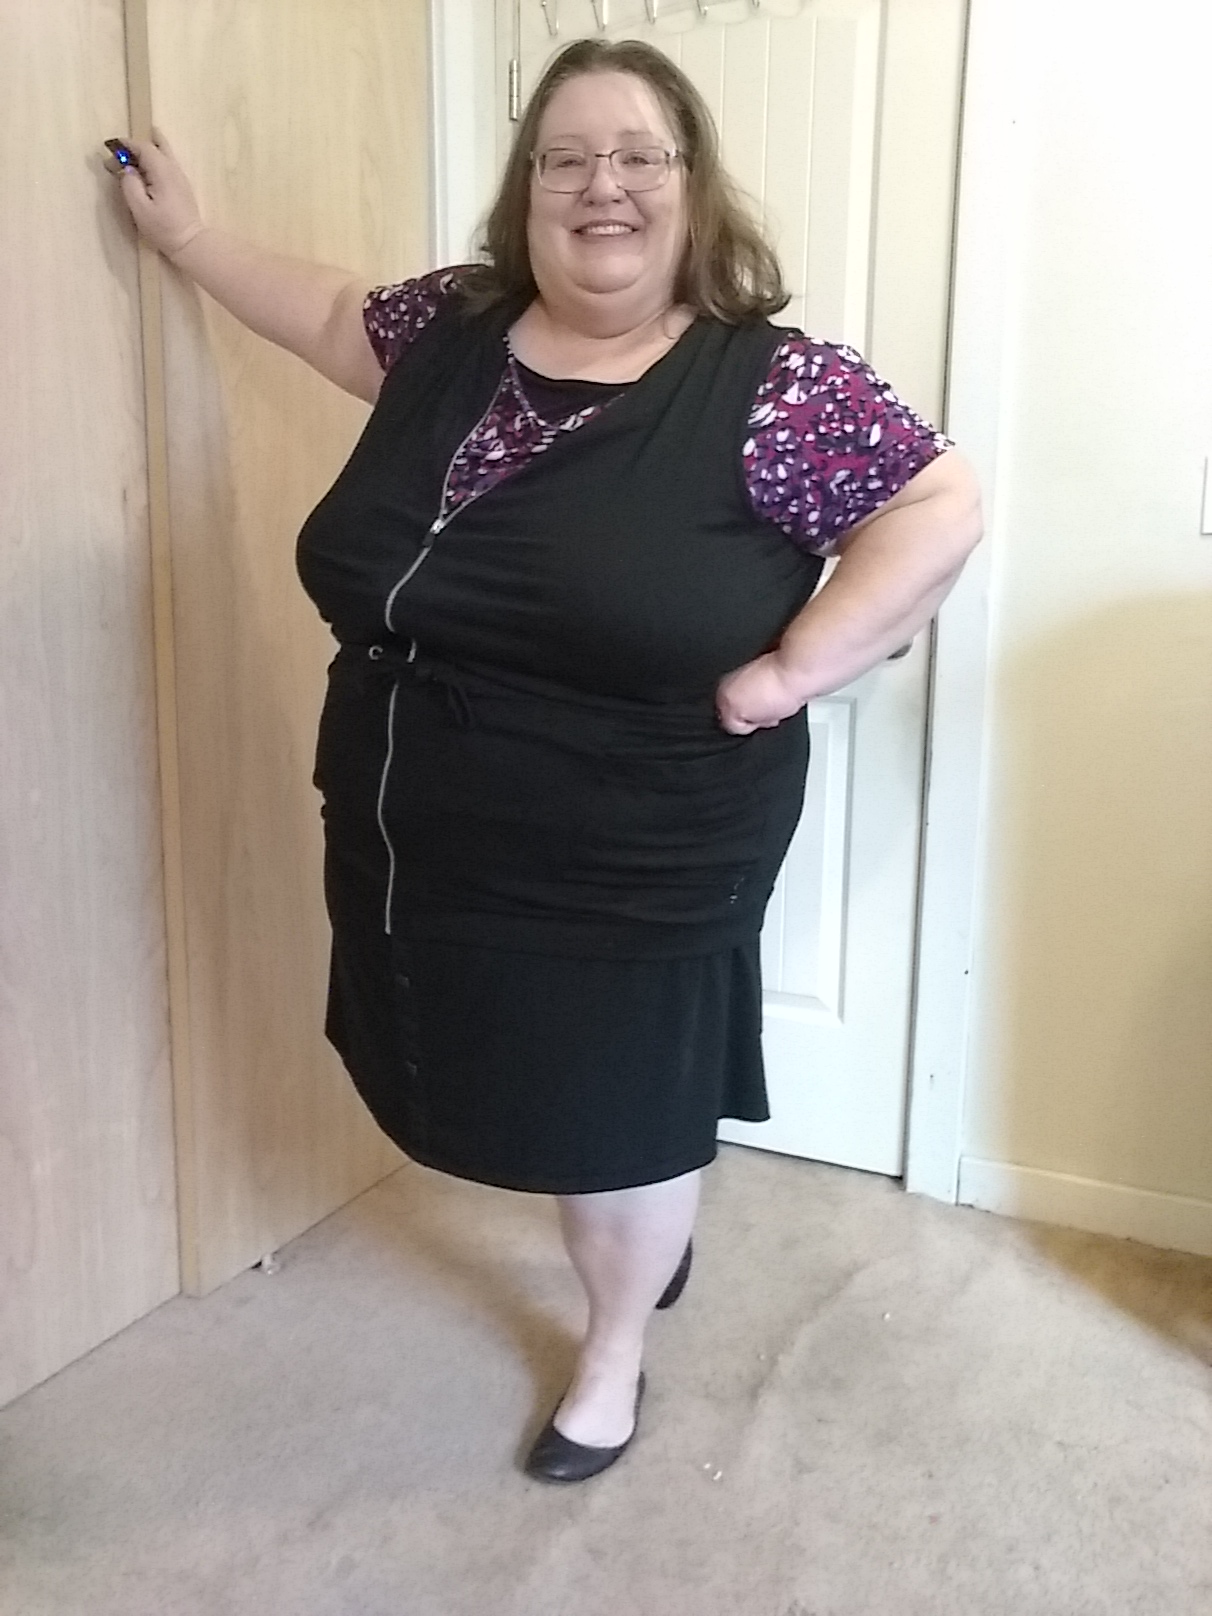 Putting Together Outfits - Plus Size Photo Shoot, January 24, 2020